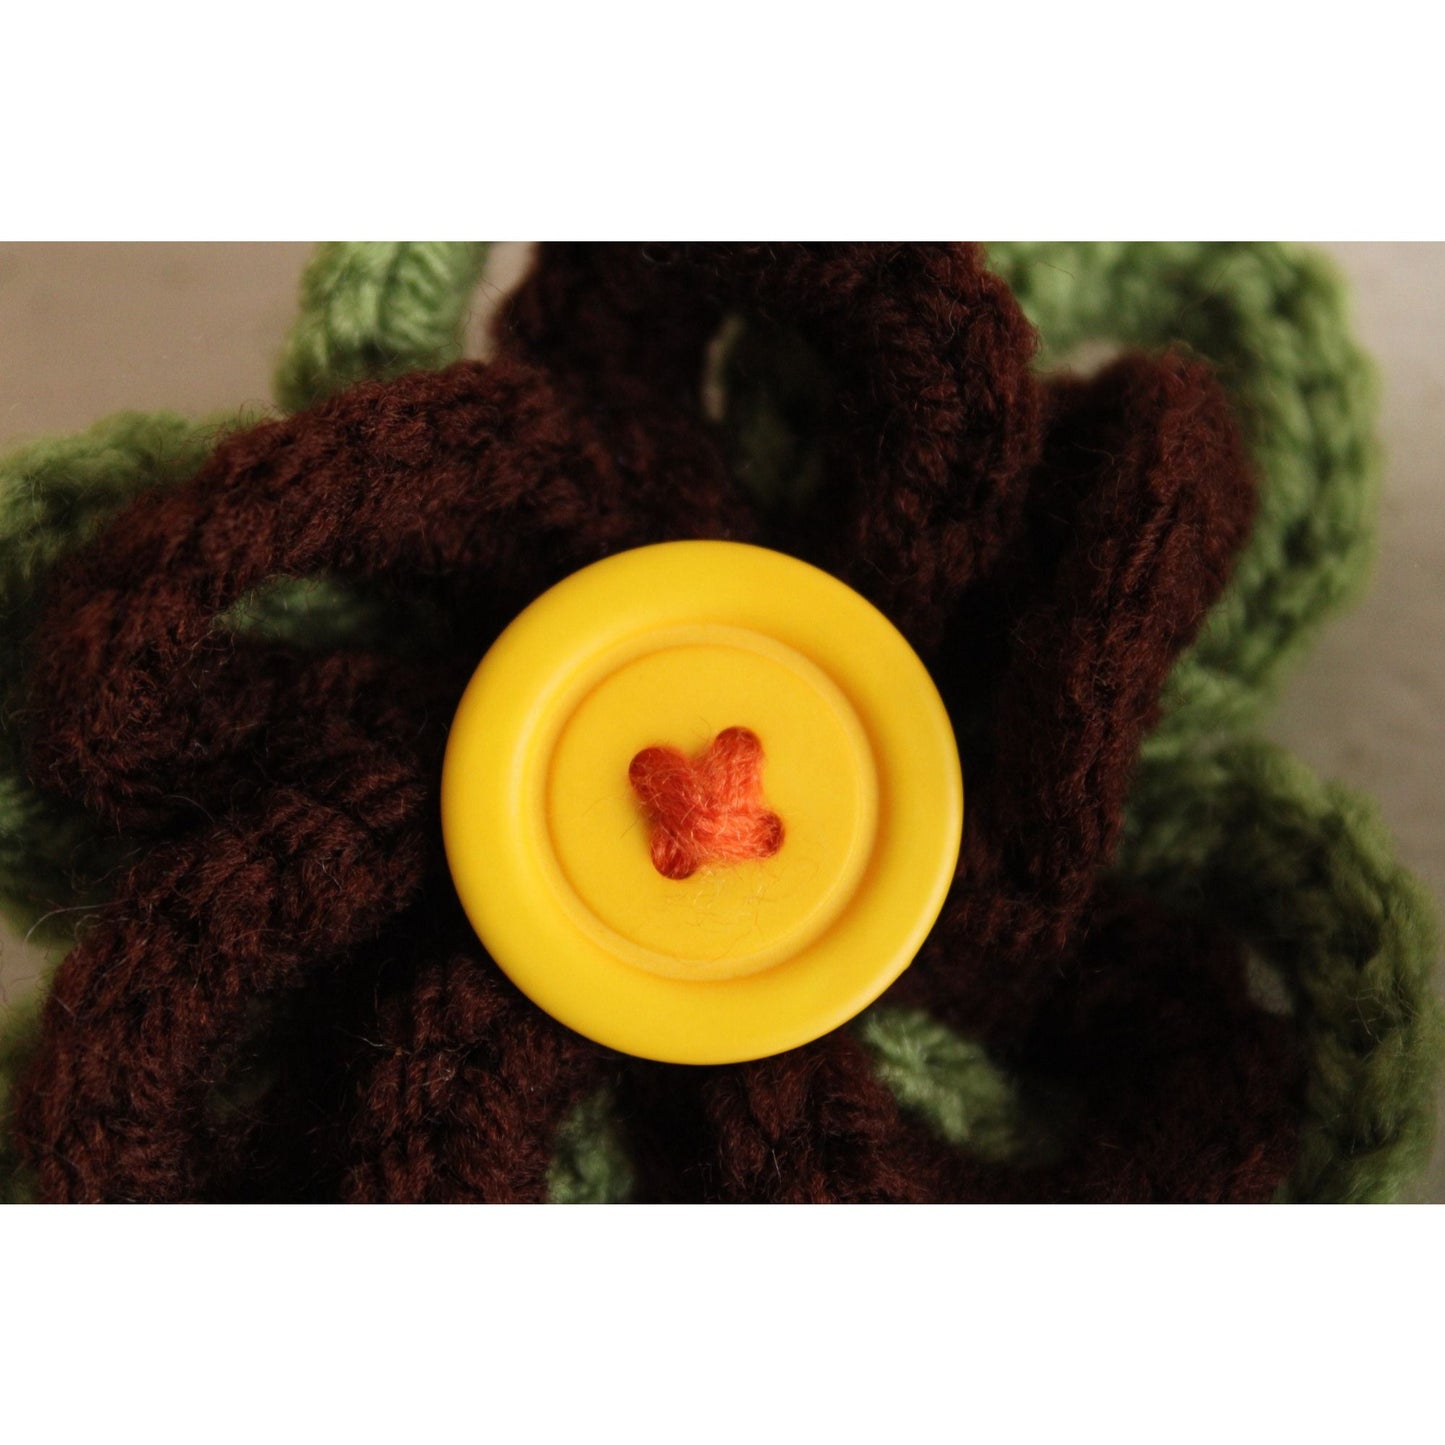 Vintage 1970s Brooch, Knit Flower with Button Center